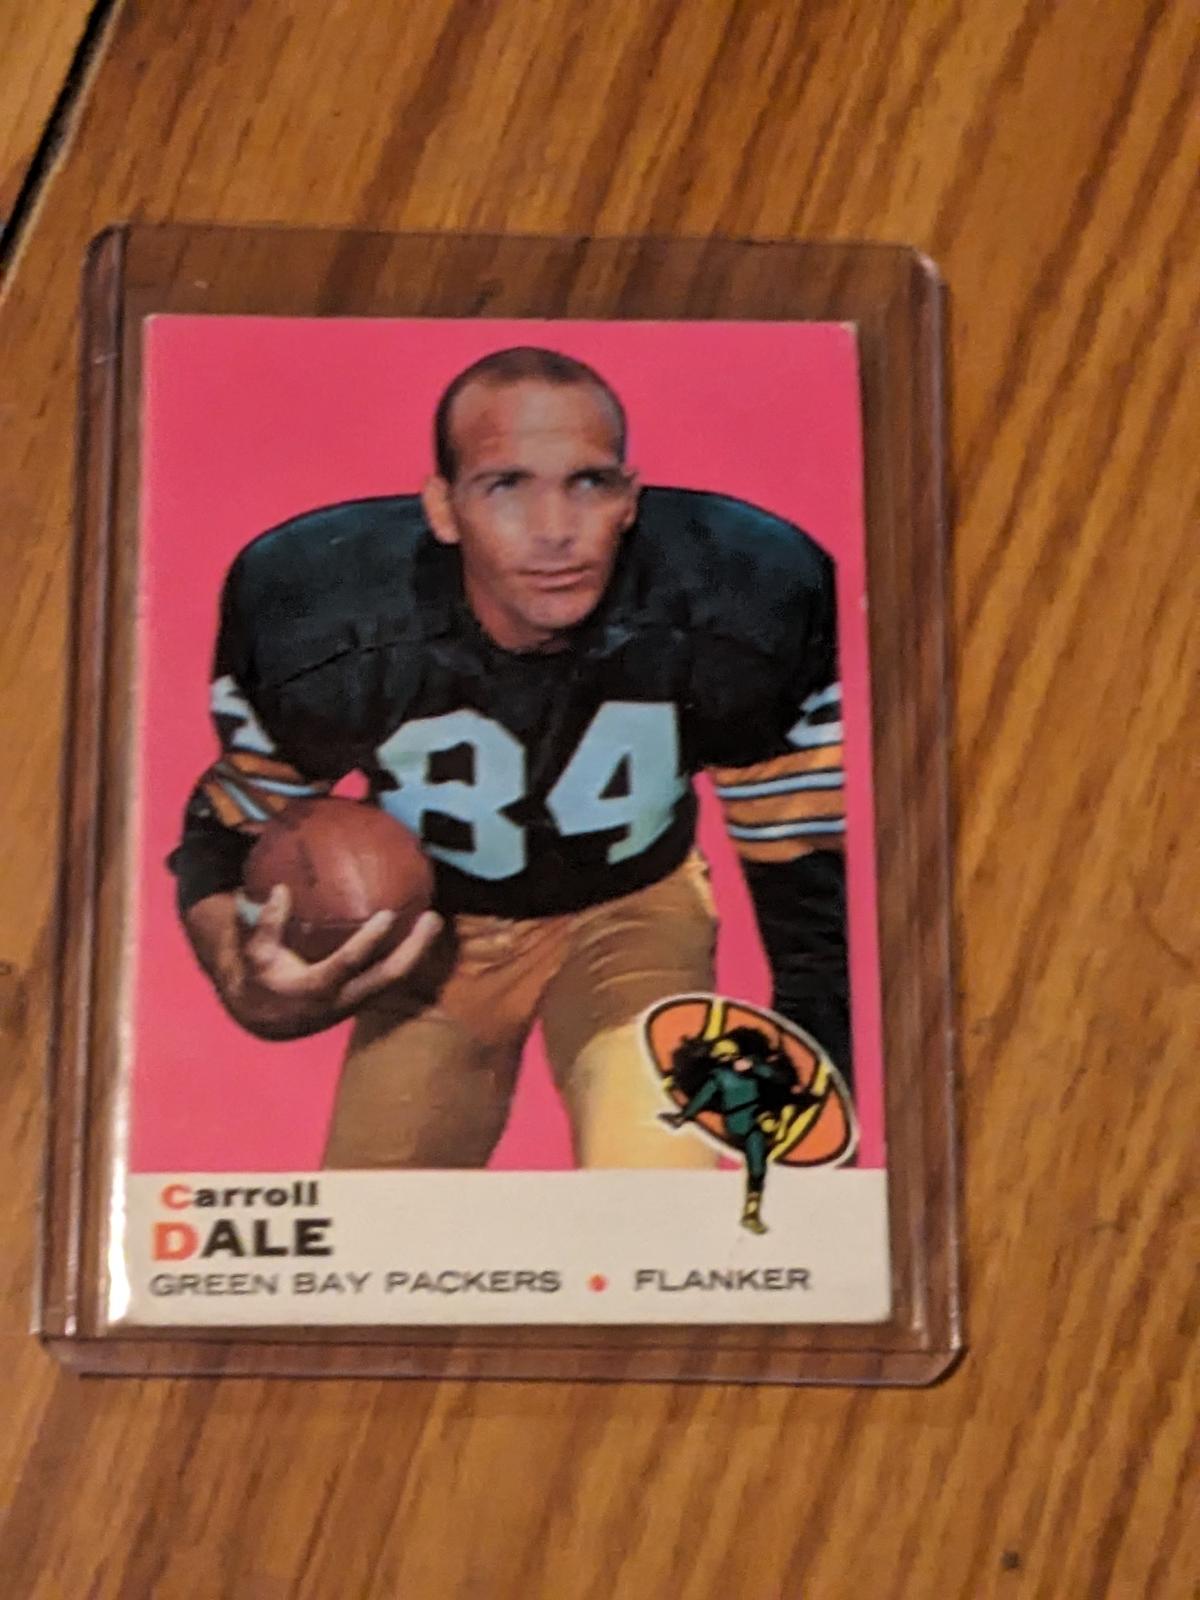 1969 RARE TOPPS FOOTBALL CARD-CARROLL DALE #77-GREEN BAY PACKERS-VINTAGE